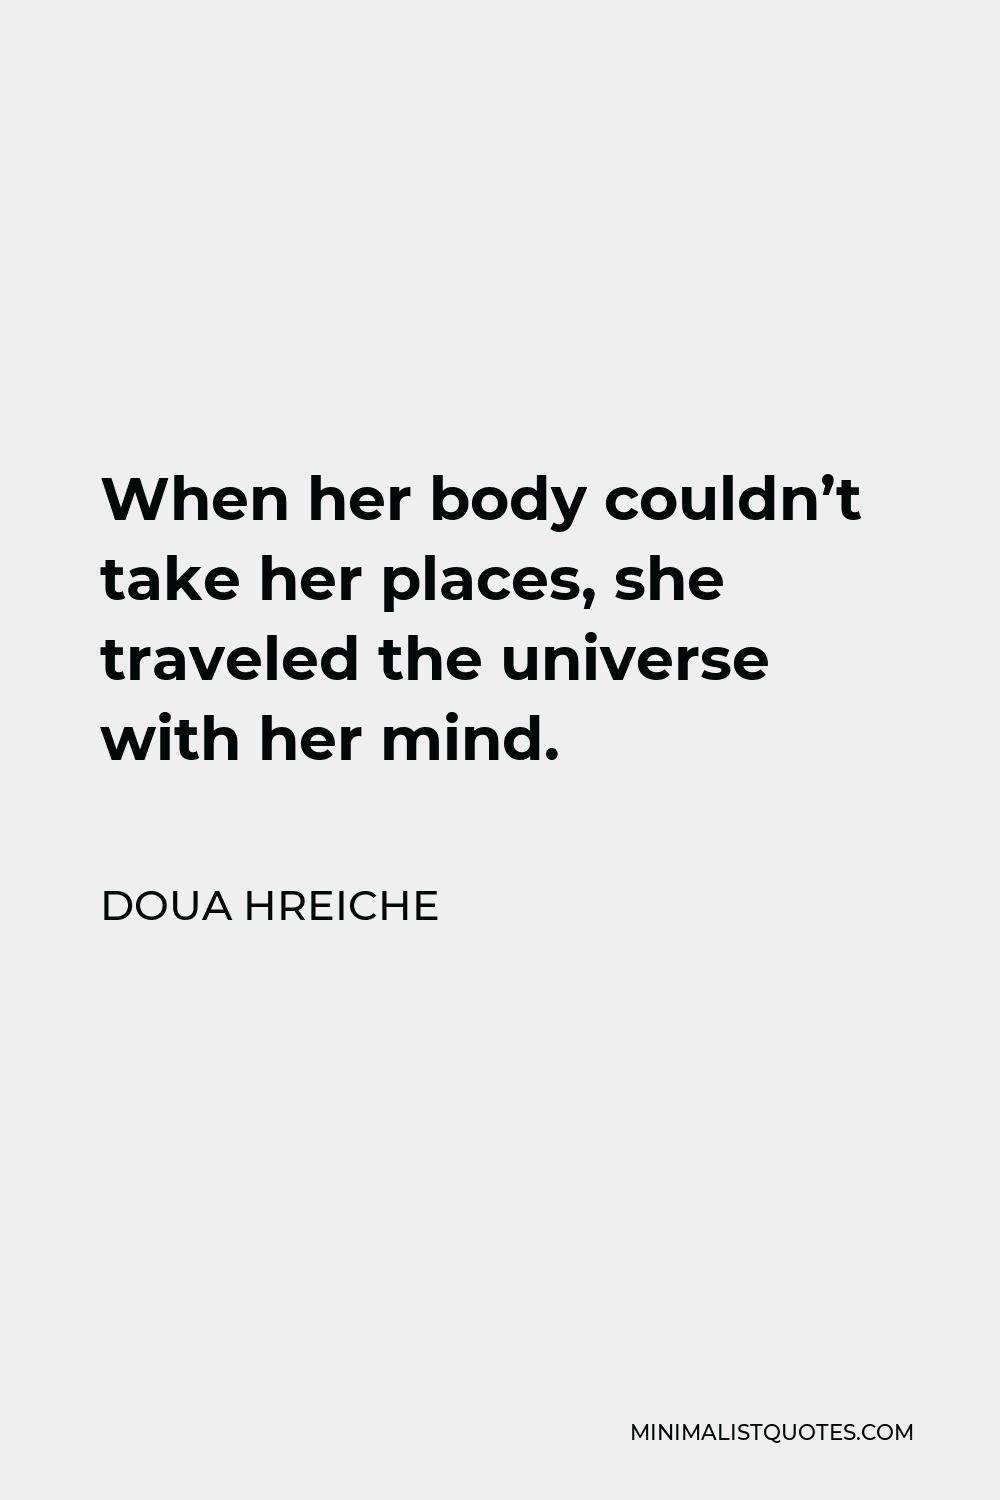 Doua Hreiche Quote - When her body couldn’t take her places, she traveled the universe with her mind.